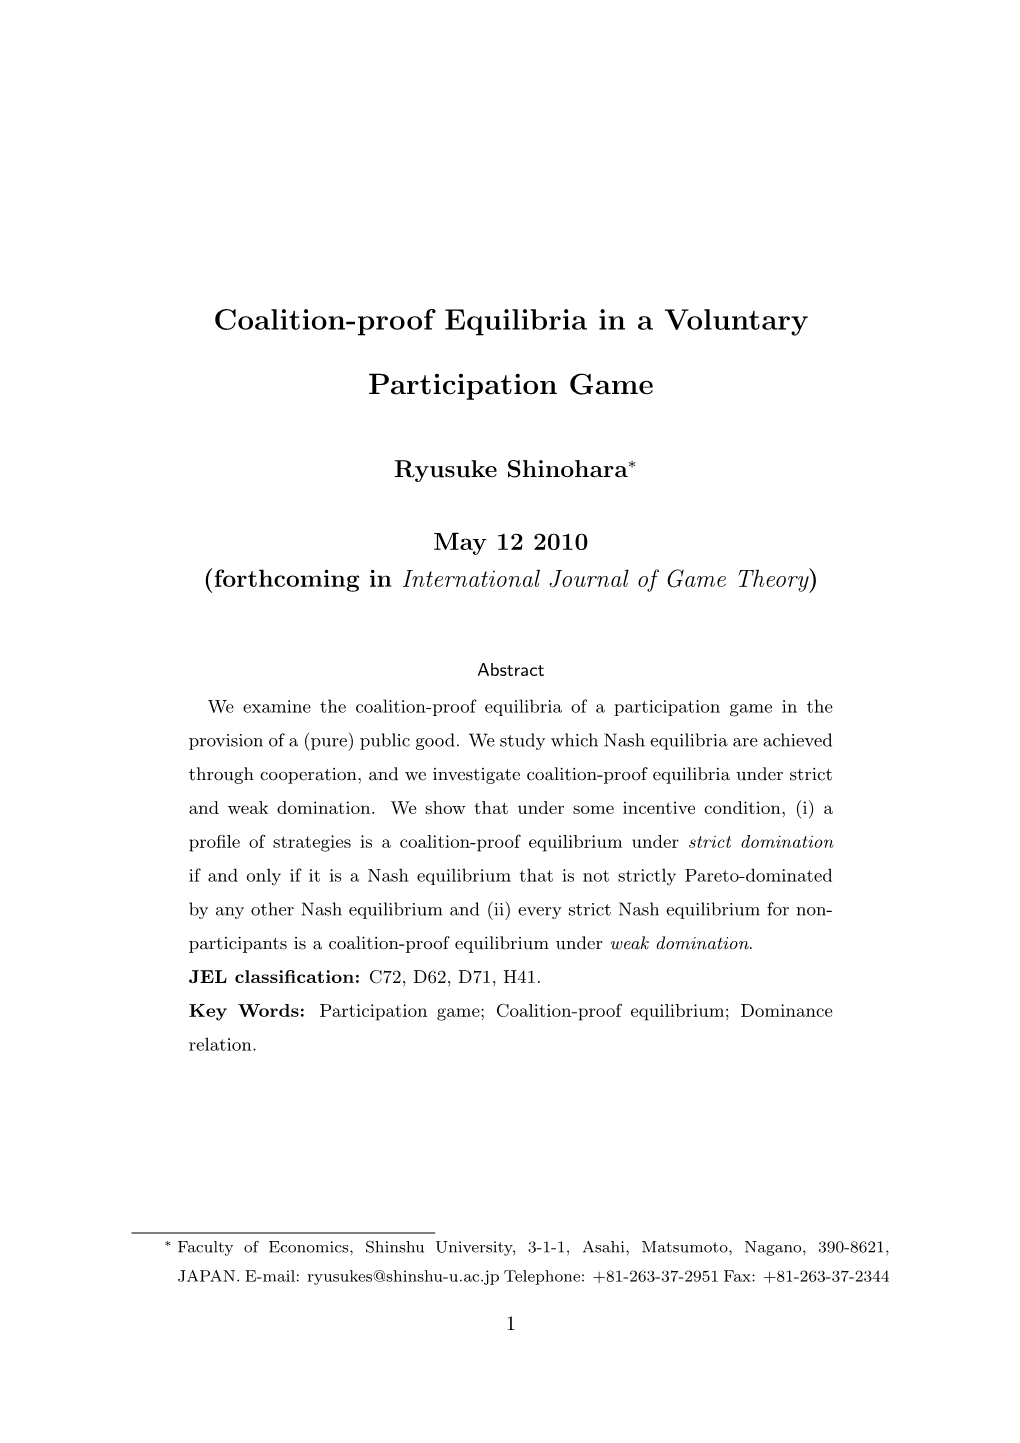 Coalition-Proof Equilibria in a Voluntary